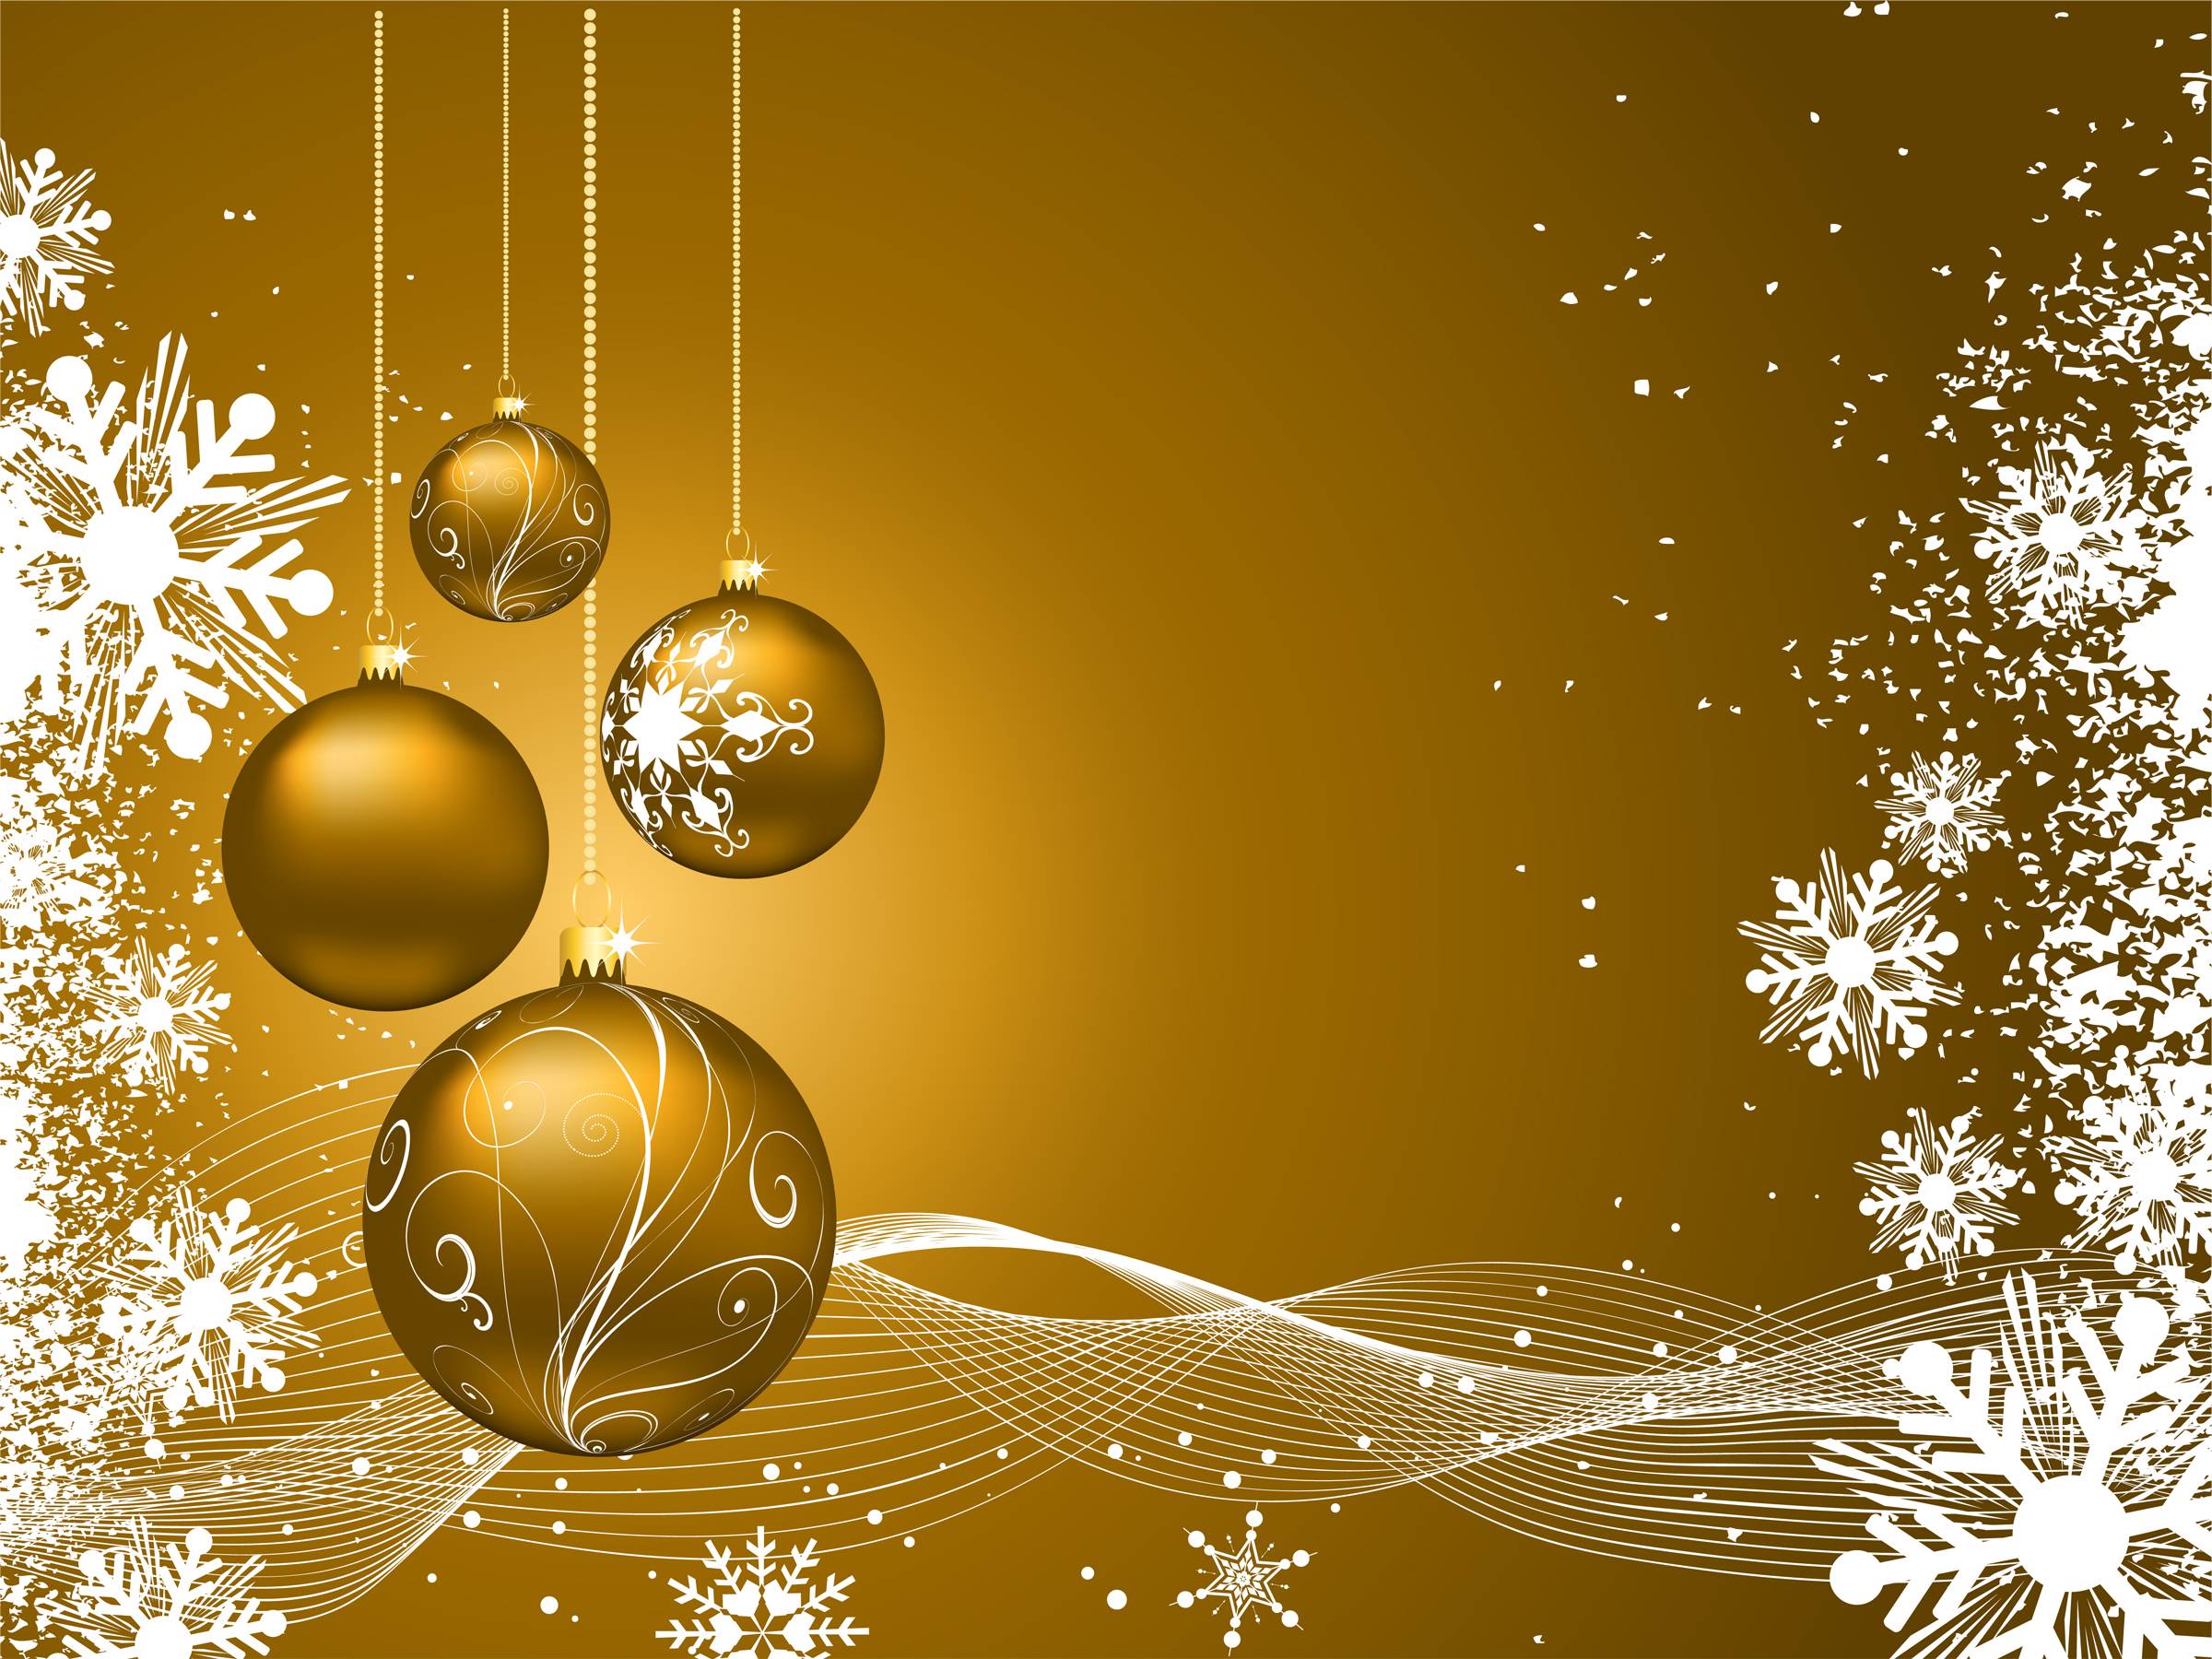 Free Christmas Background Image, Download Free Clip Art